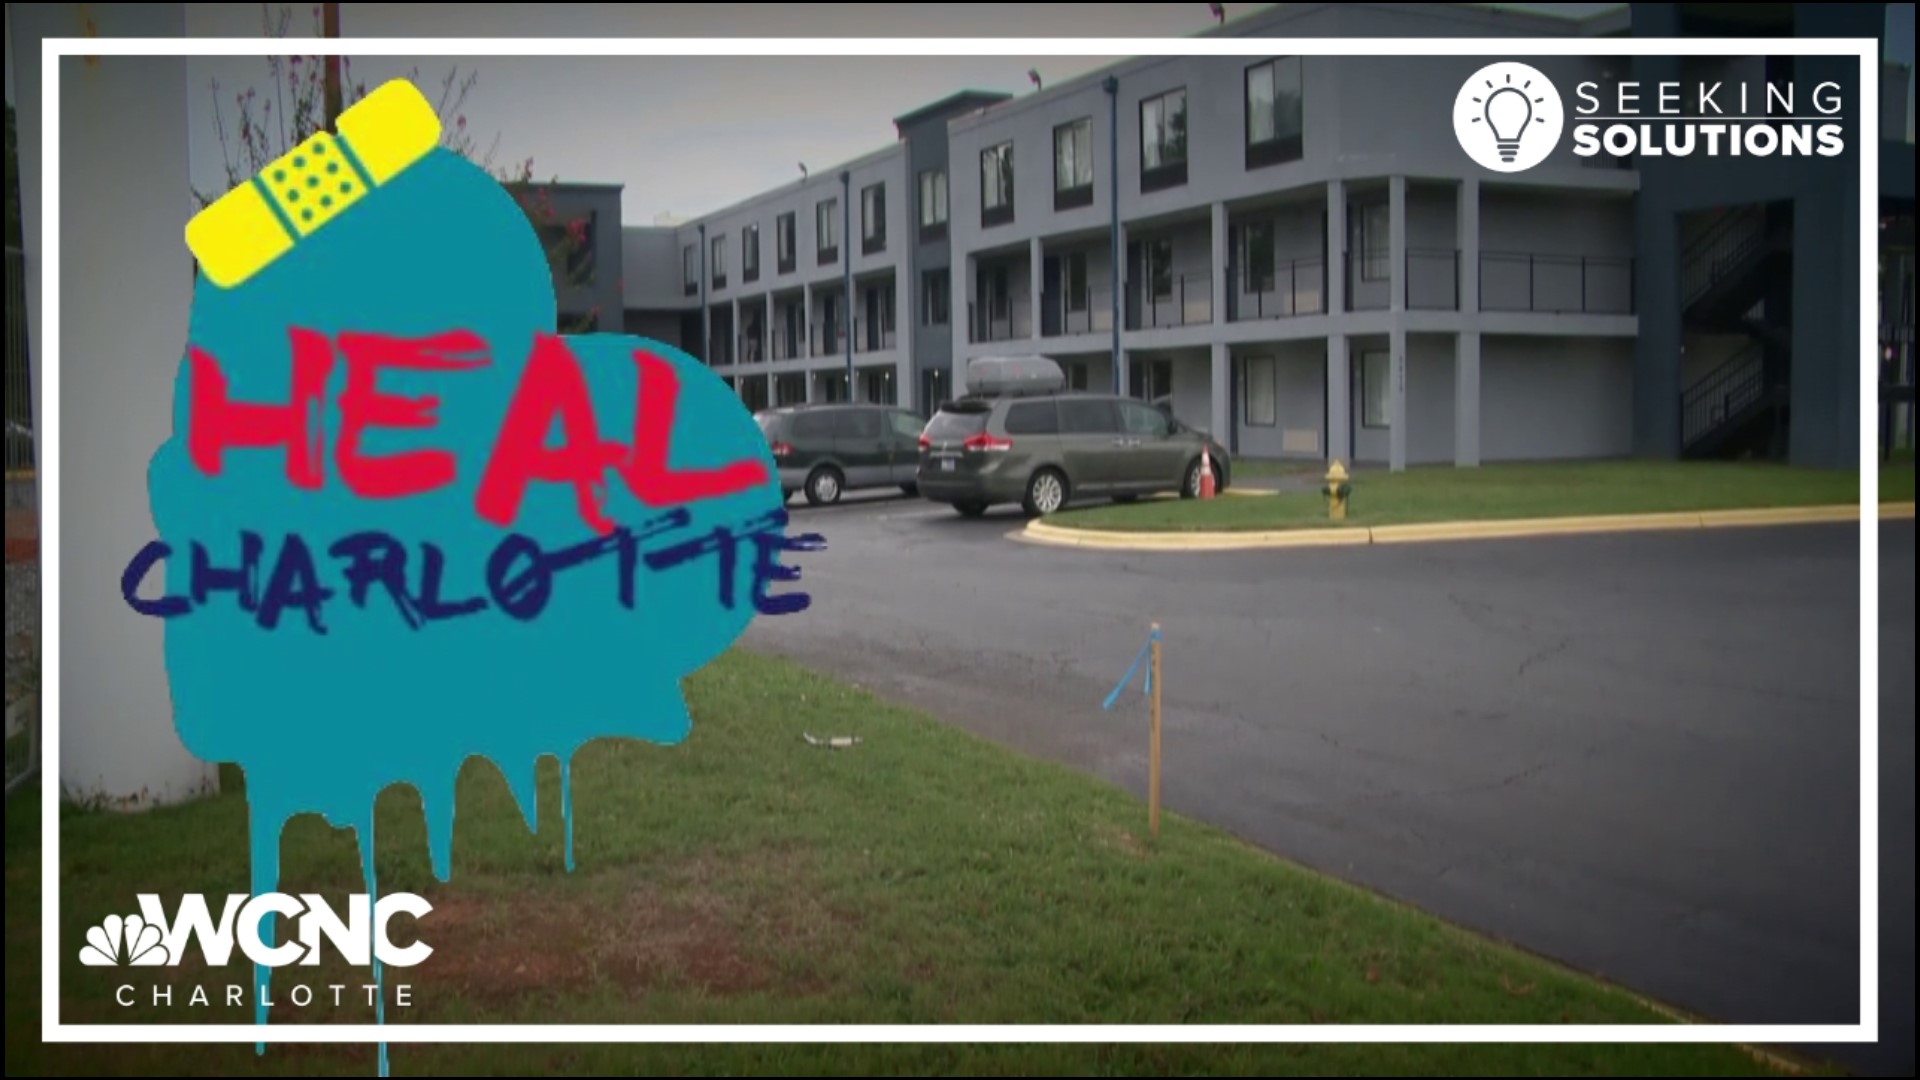 This week, the city of Charlotte awarded millions of dollars to local nonprofits to help them create affordable housing. One of the recipients is Heal Charlotte.